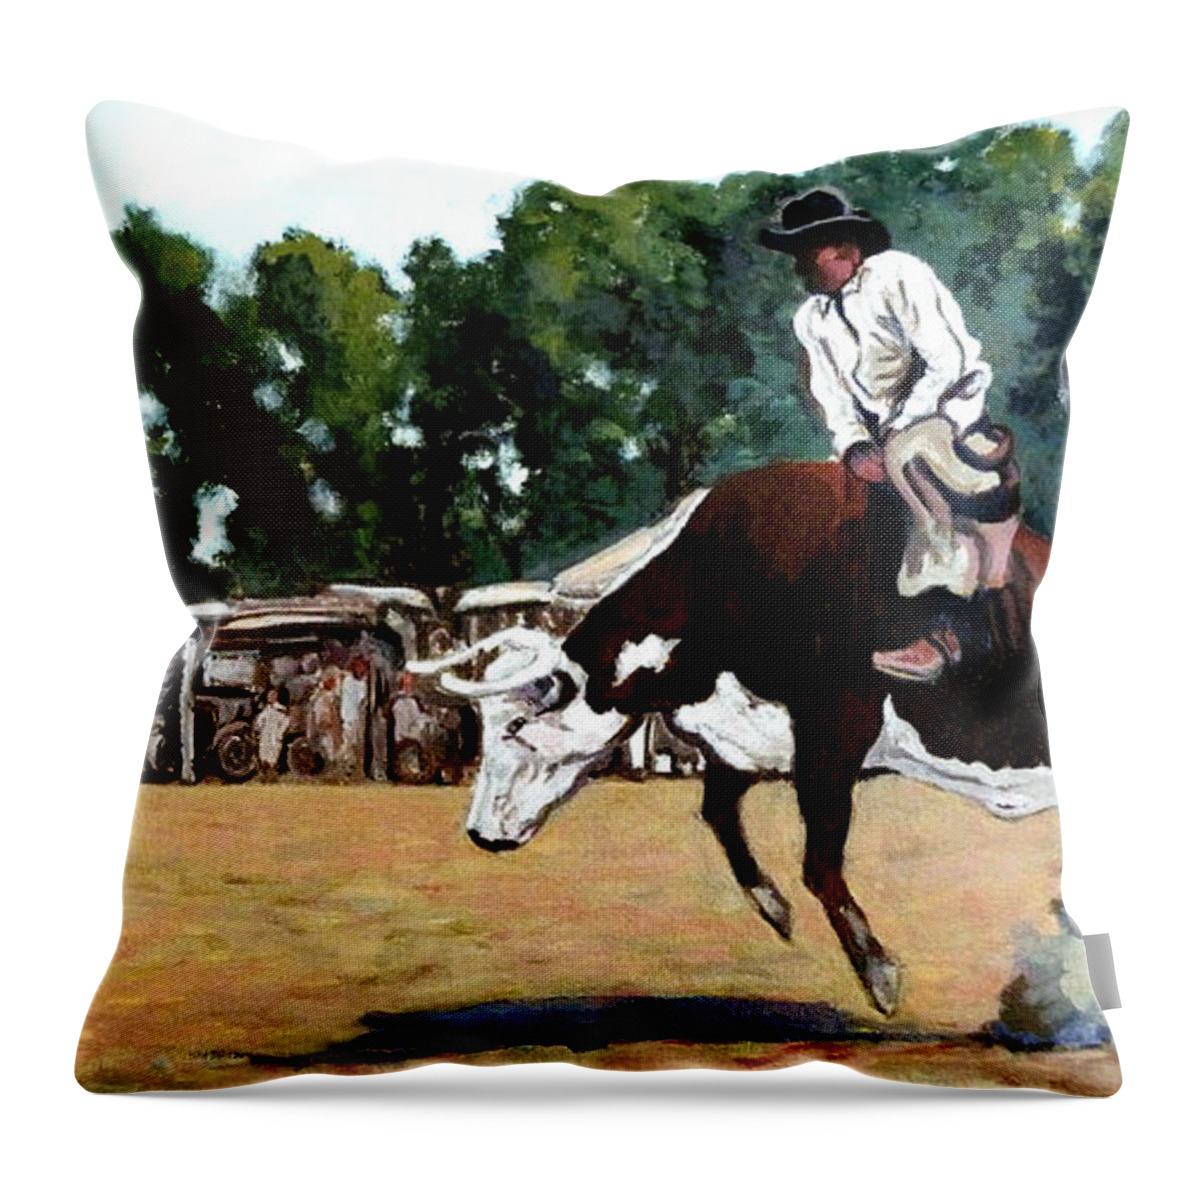 Bull Throw Pillow featuring the painting A Whole Lot of Bull by Tom Roderick